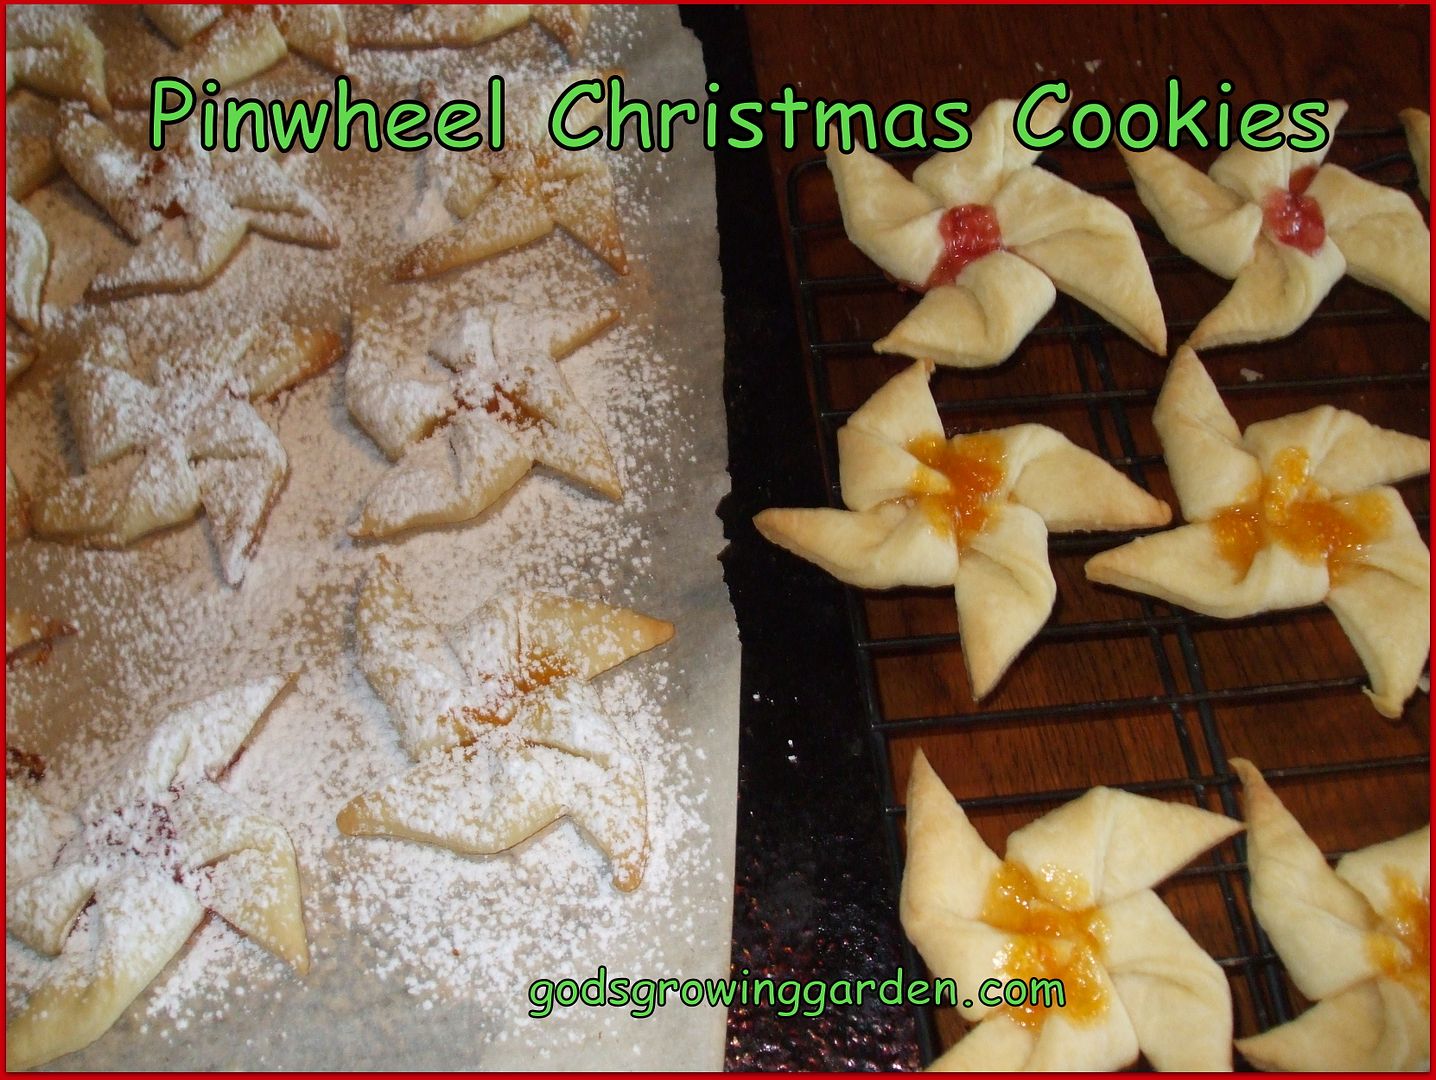 Pinwheel Cookies by Angie Ouellette-Tower for godsgrowinggarden.com photo DSCF0686_zps238dd678.jpg